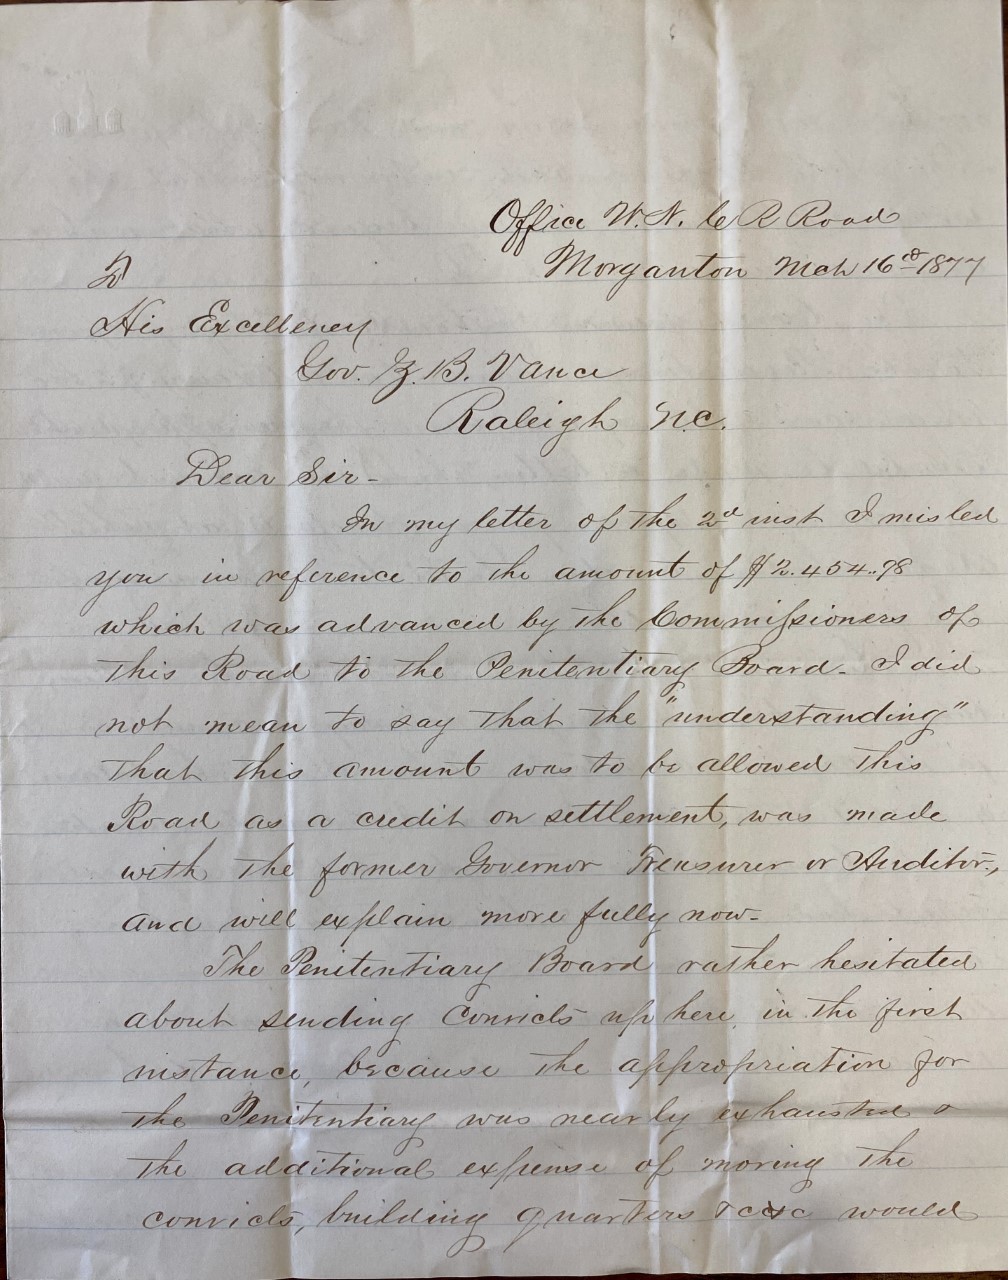 Page one of letter from Geo. P. Erwin to ZBV, March 16, 1877